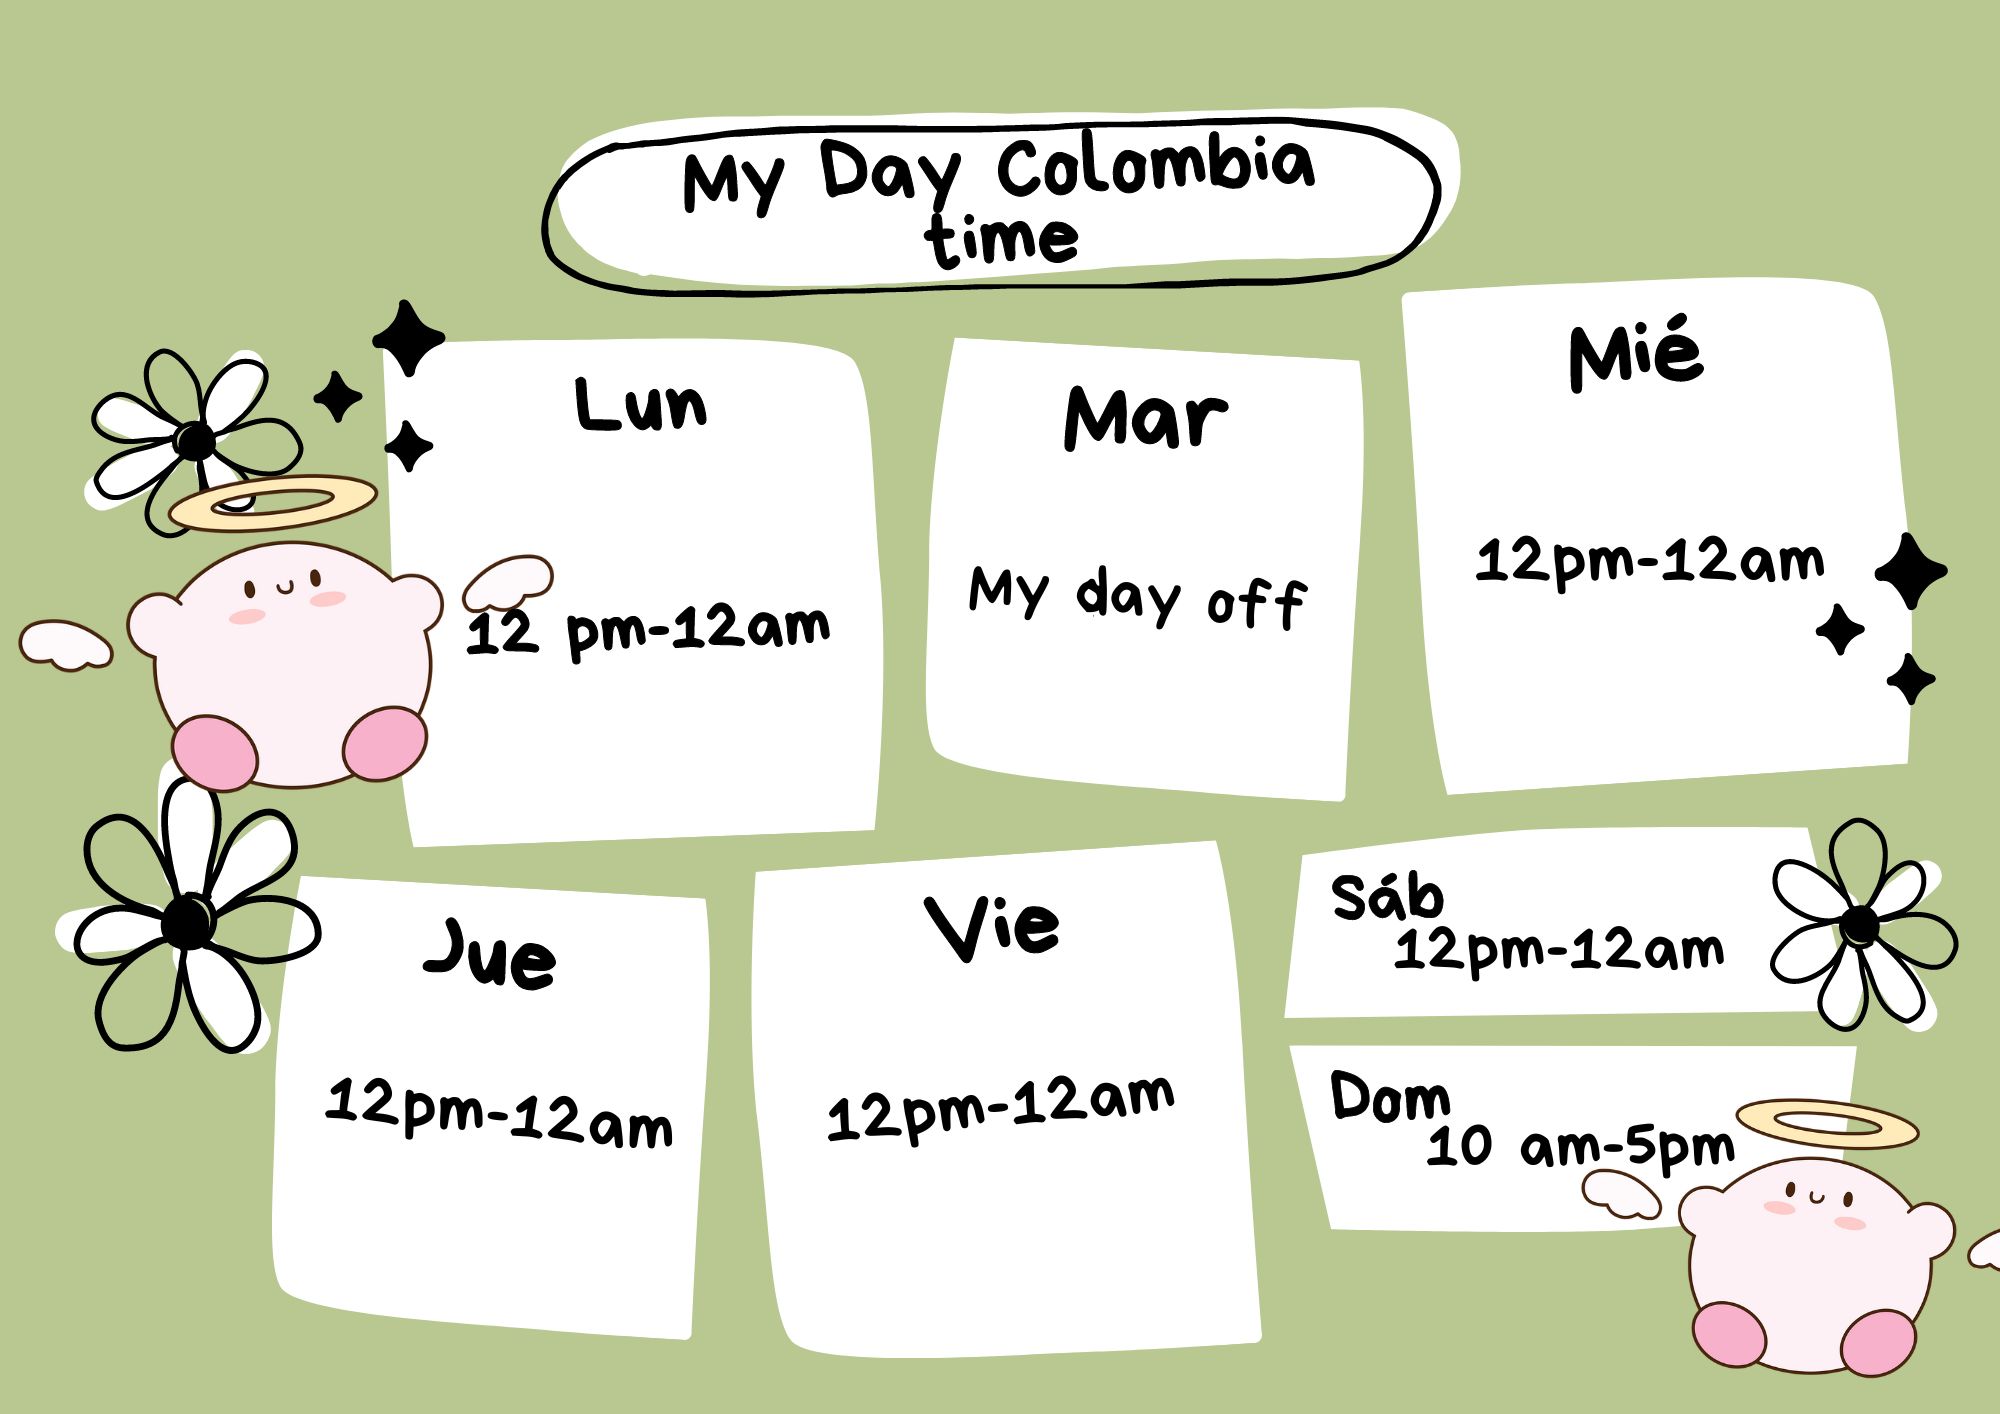 Alasska_Lumi My Day Colombia time image: 1